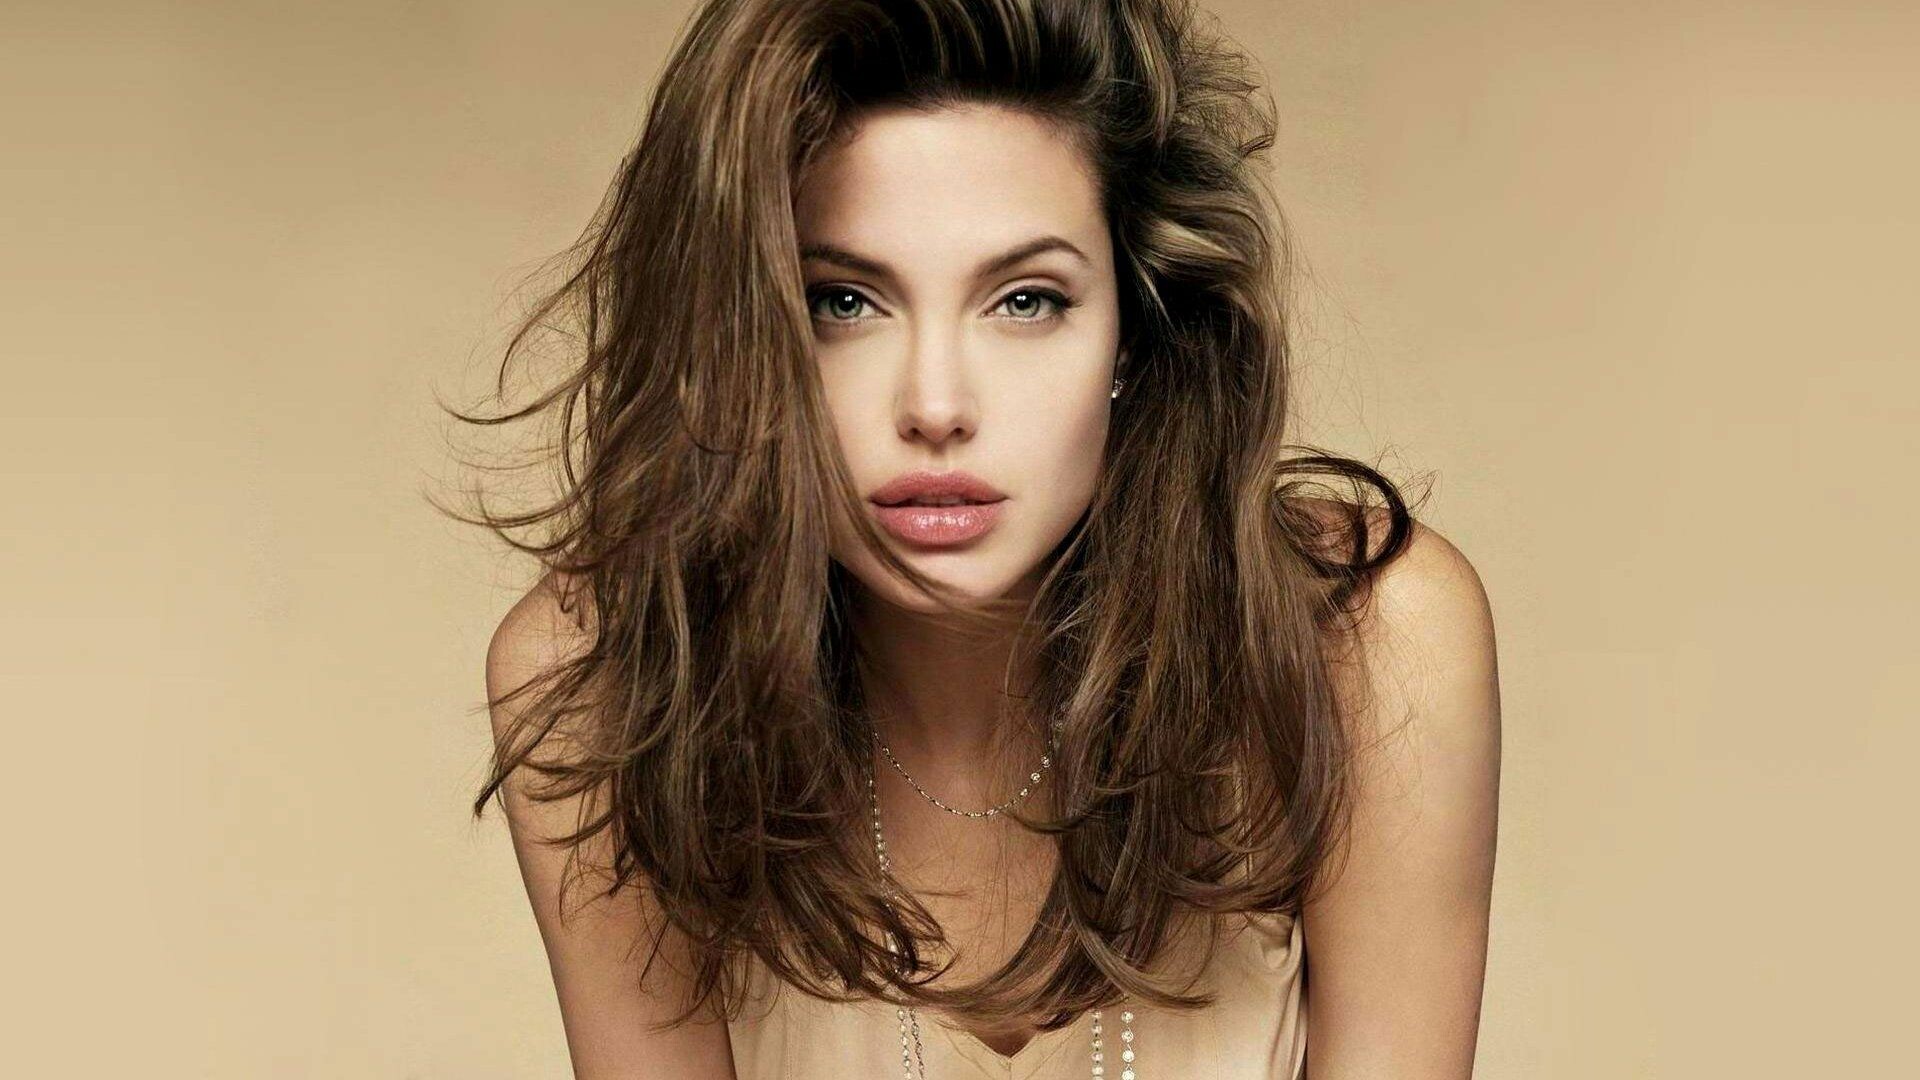 Angelina Jolie: The world's second-highest-paid actress. 1920x1080 Full HD Wallpaper.